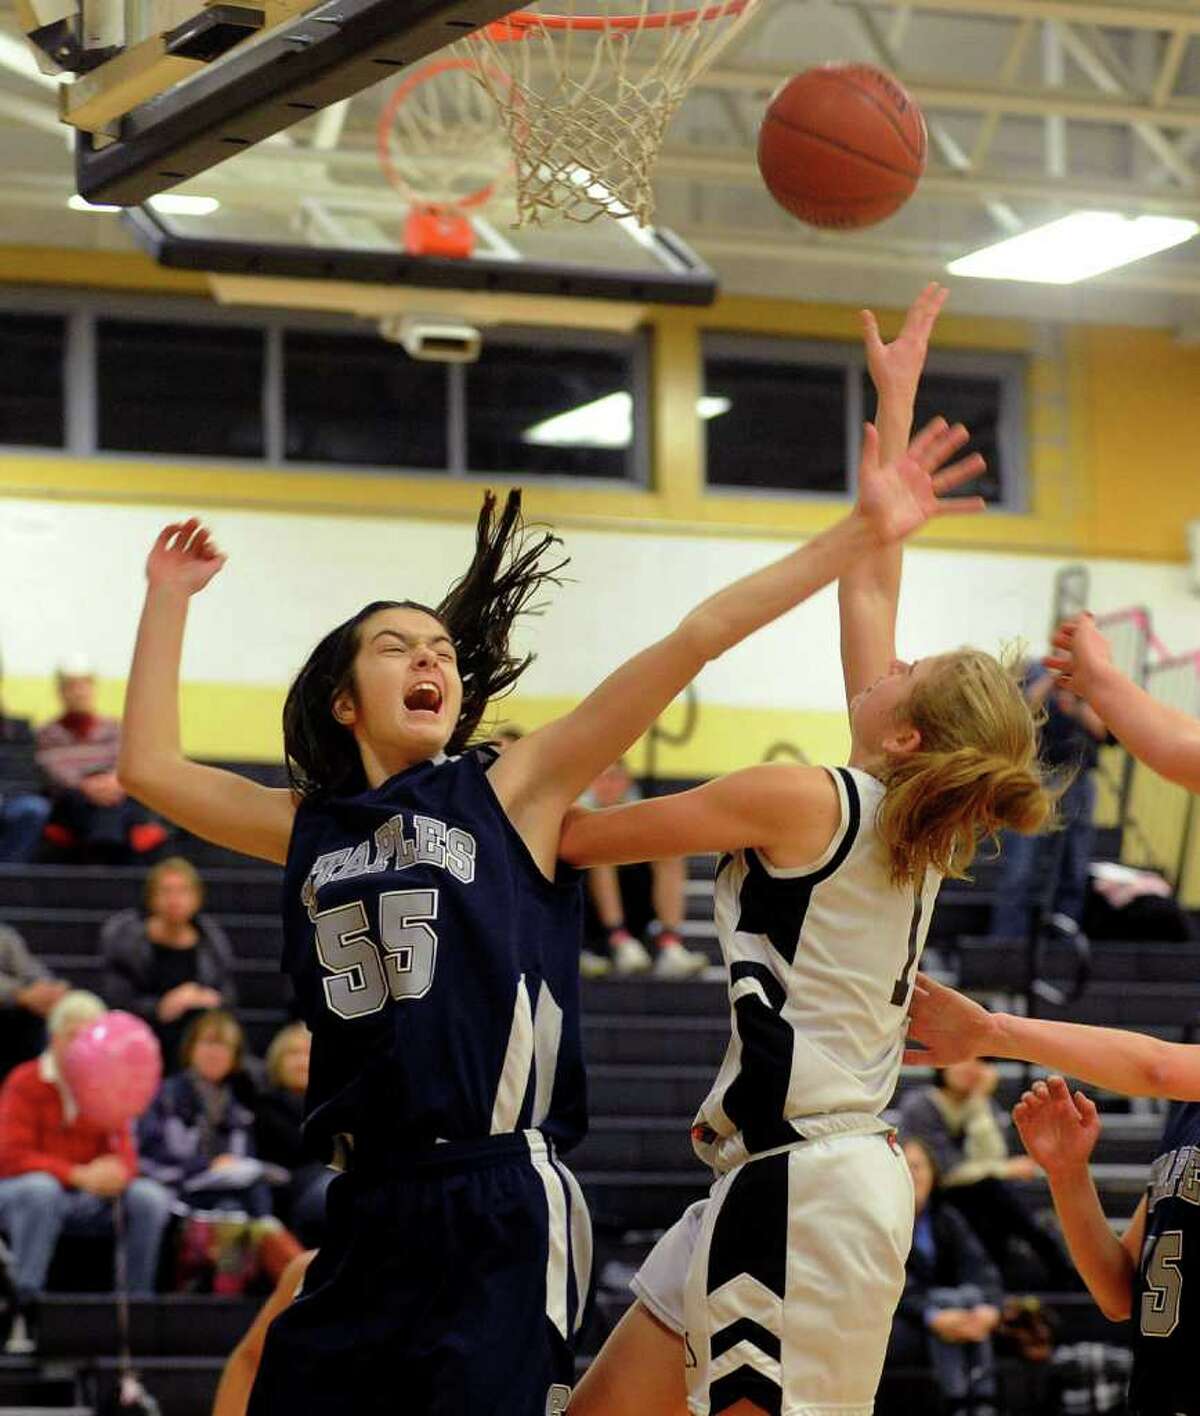 Staples' #55 Madeline Schemel, left, tries to block a shot by Trumbull's #1 Alexa Pfohl, during girls basketball action in Trumbull, Conn. on Friday February 10, 2012.